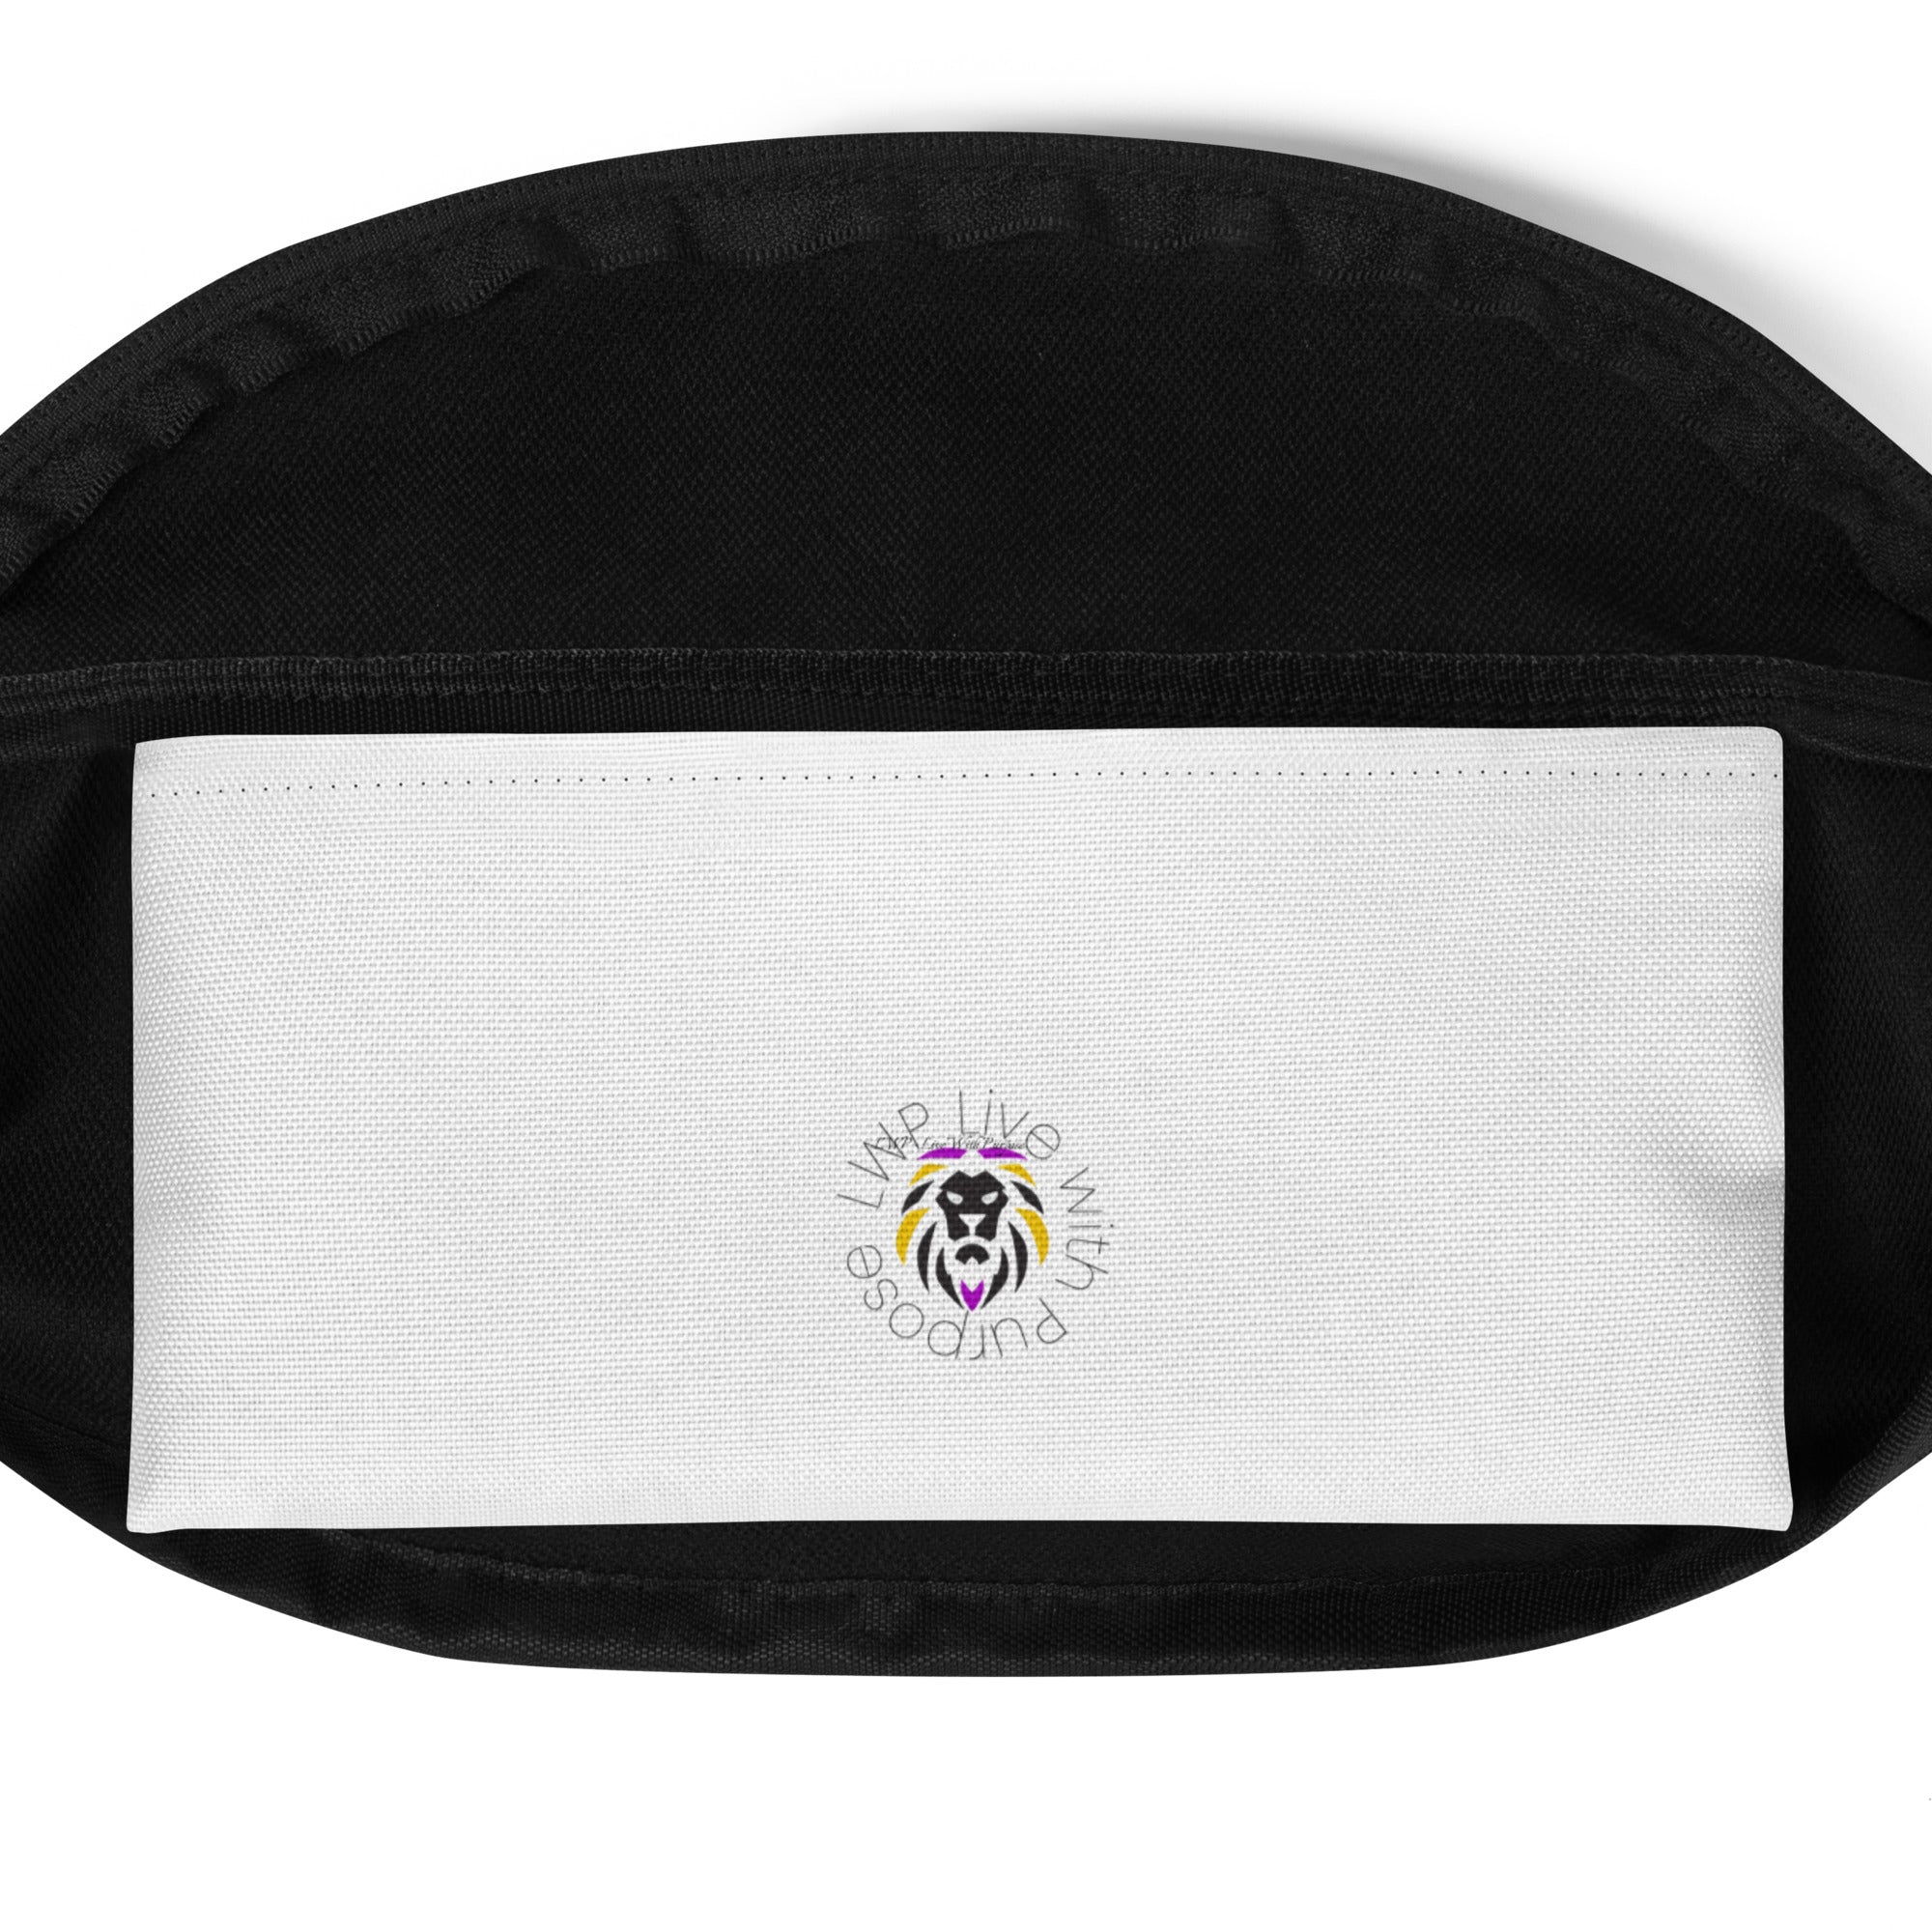 Fanny Pack - Persian Queen Signature: Stylish Convenience for Festivals and Travel